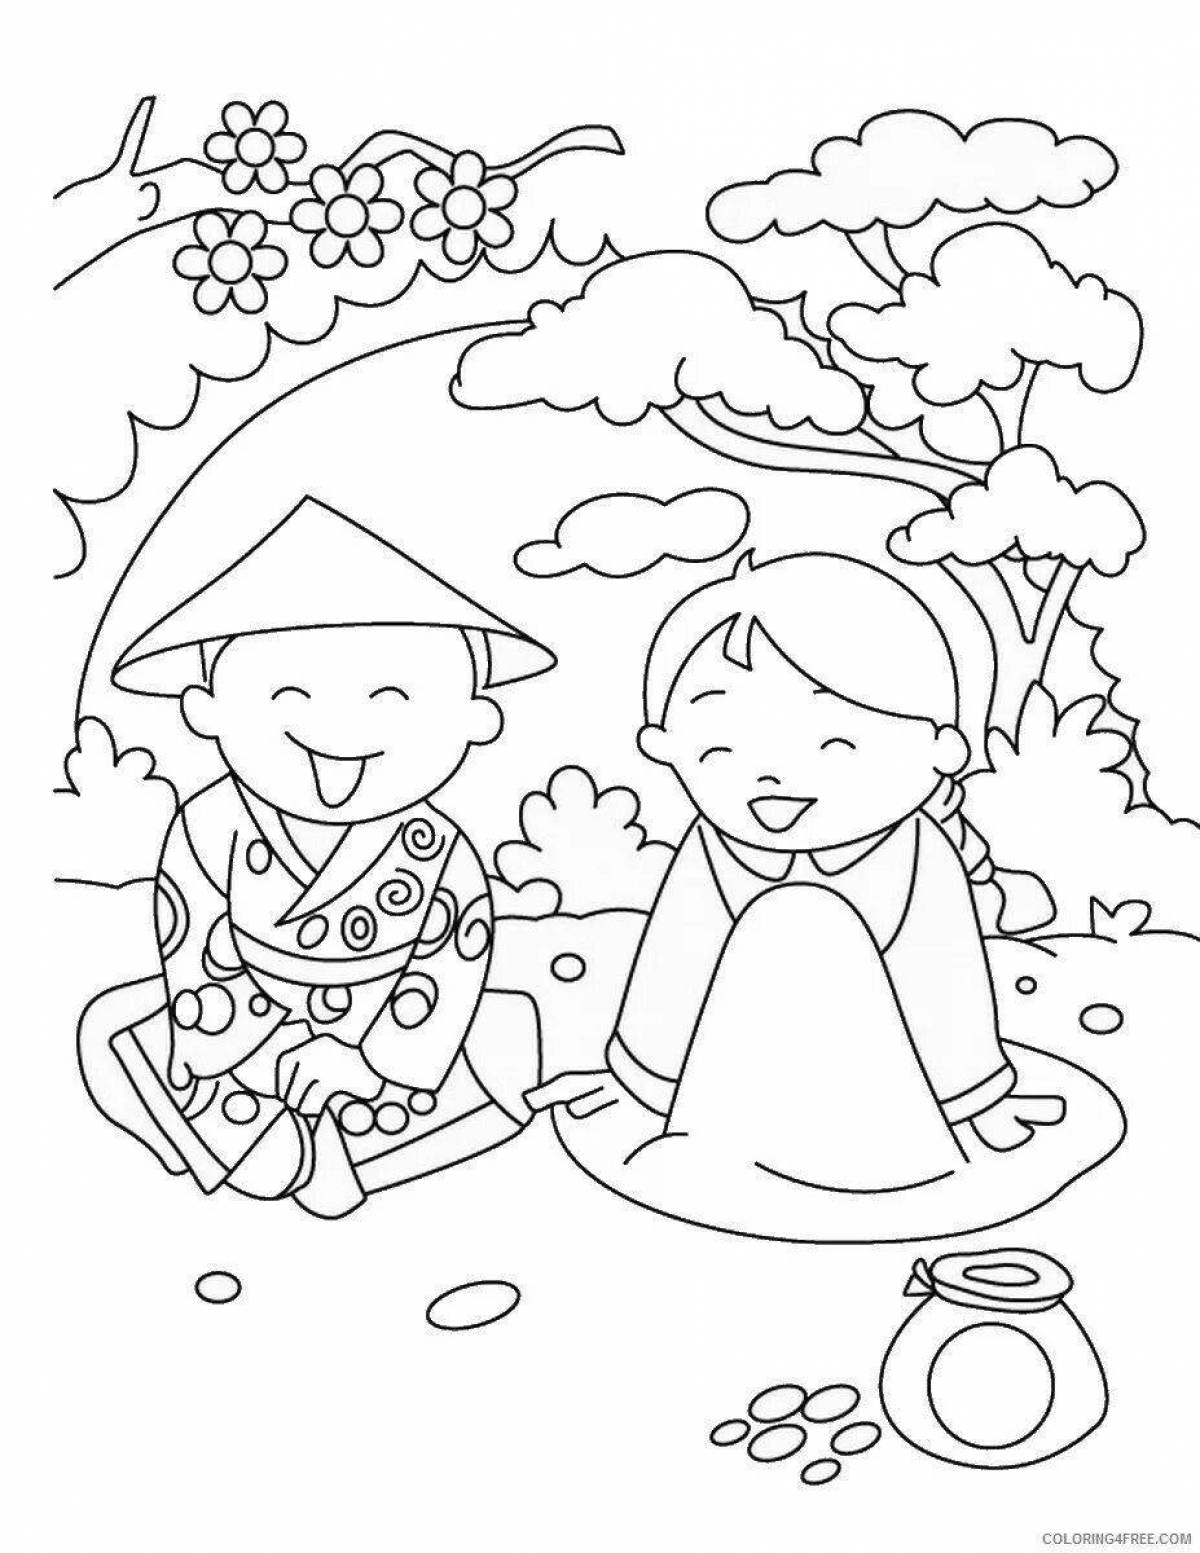 Joyful Chinese New Year coloring book for kids